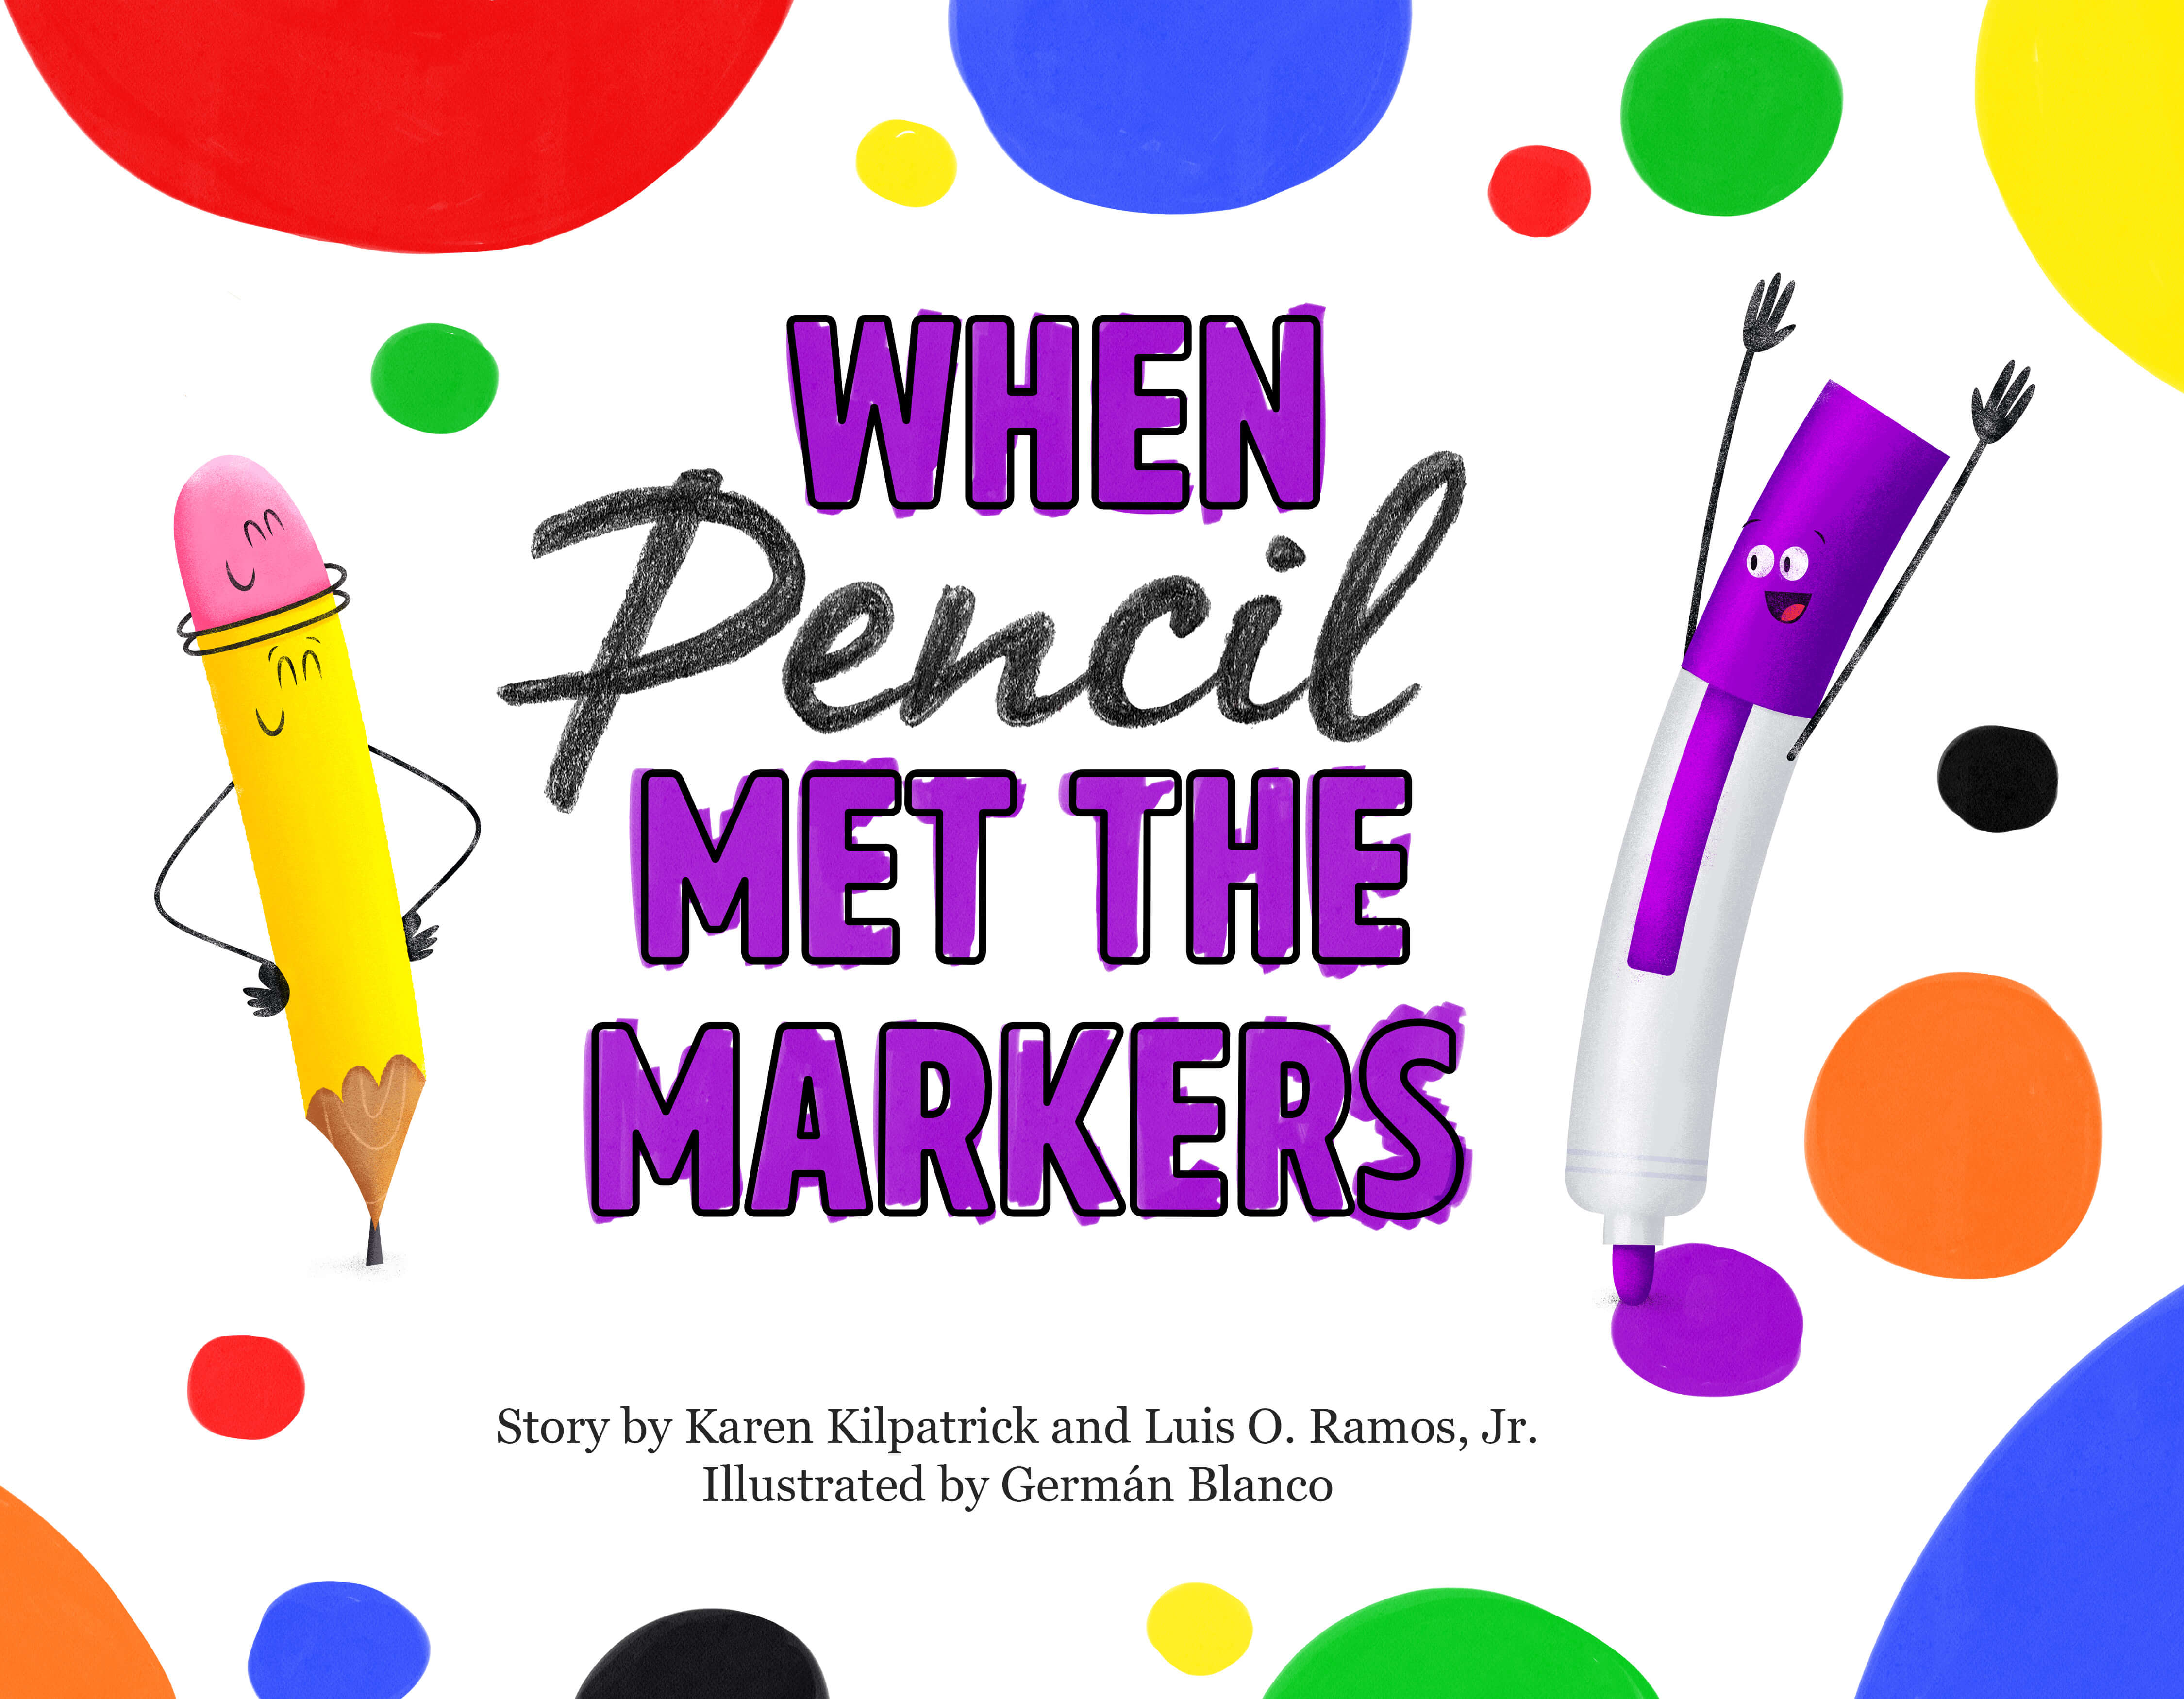 WHEN PENCIL MET THE MARKERS